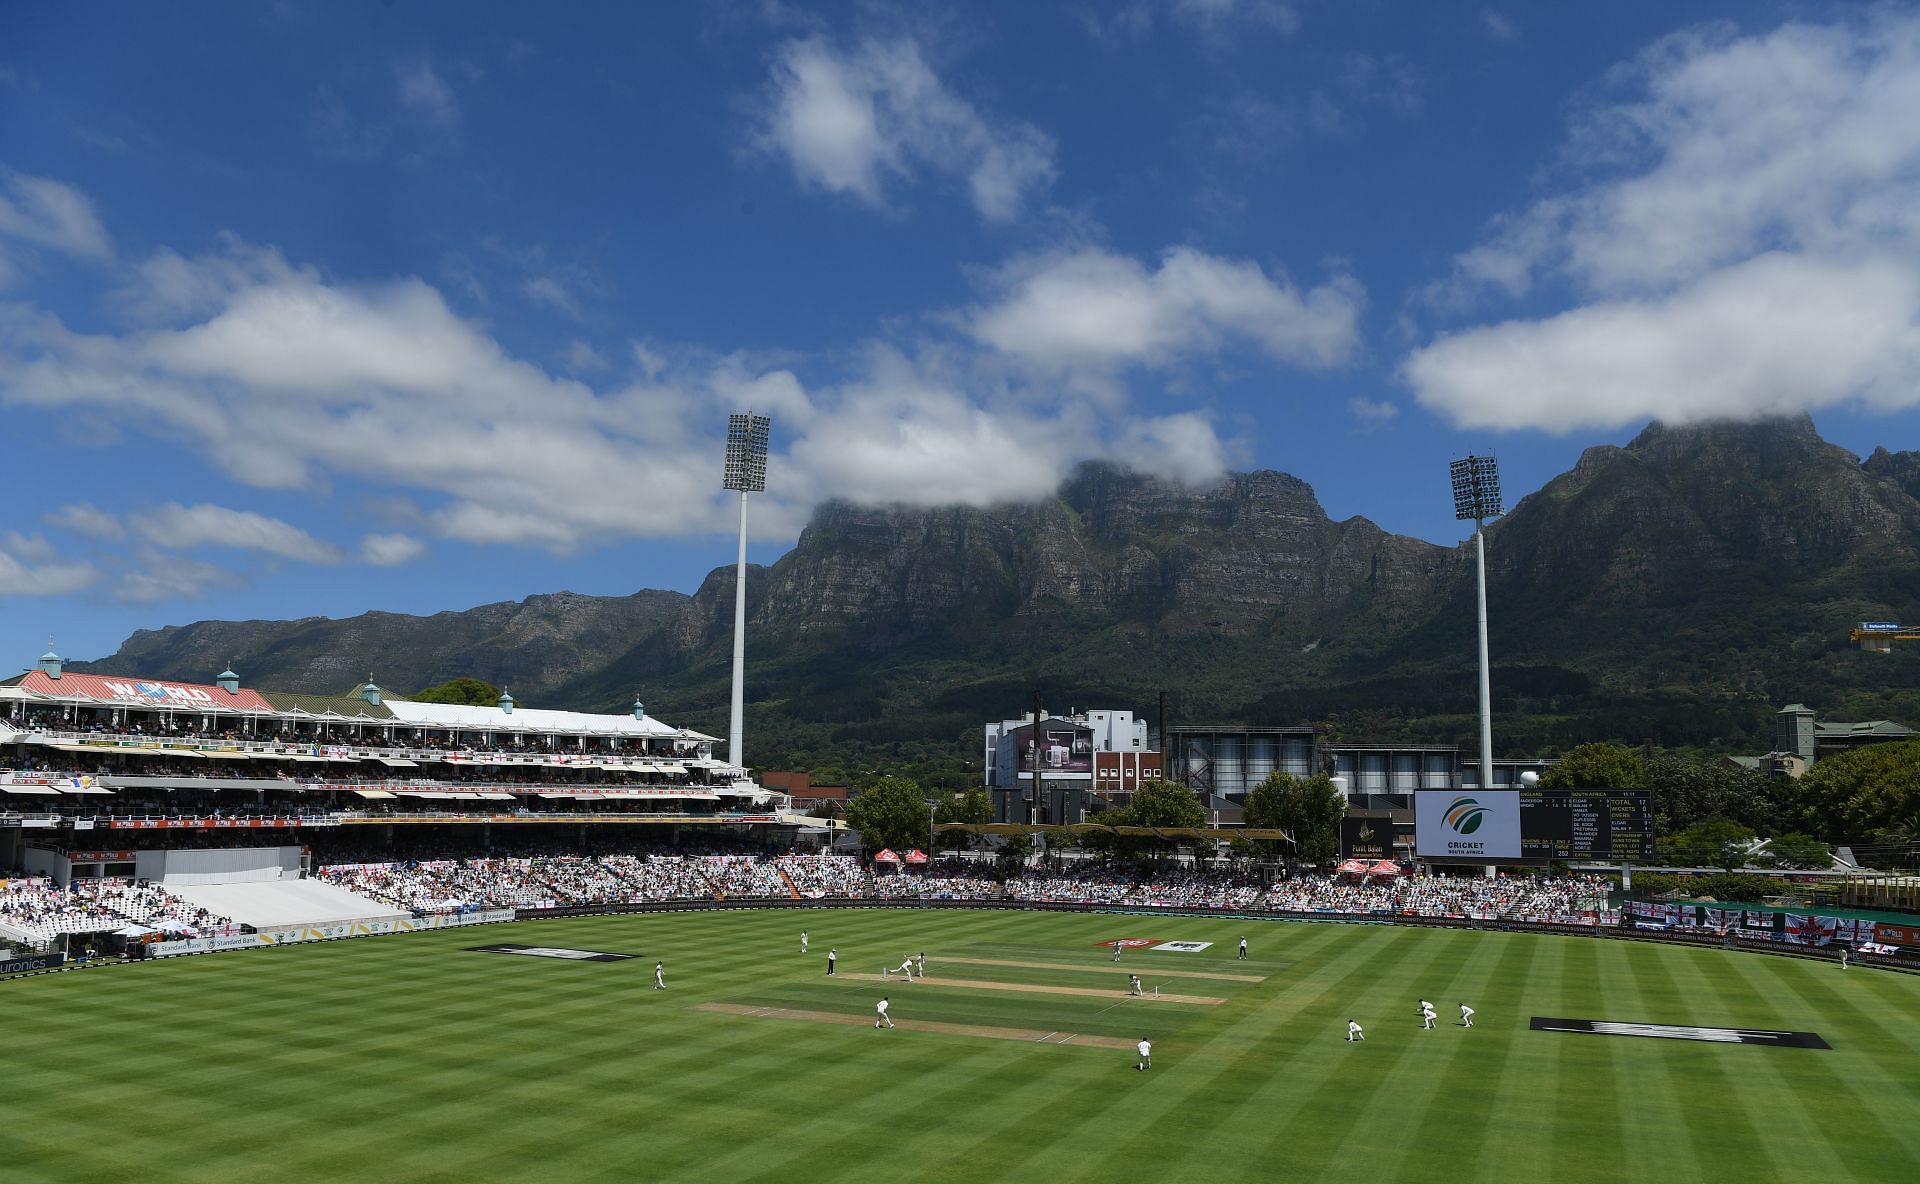 Cape Town will host the final game of the India vs South Africa Test series